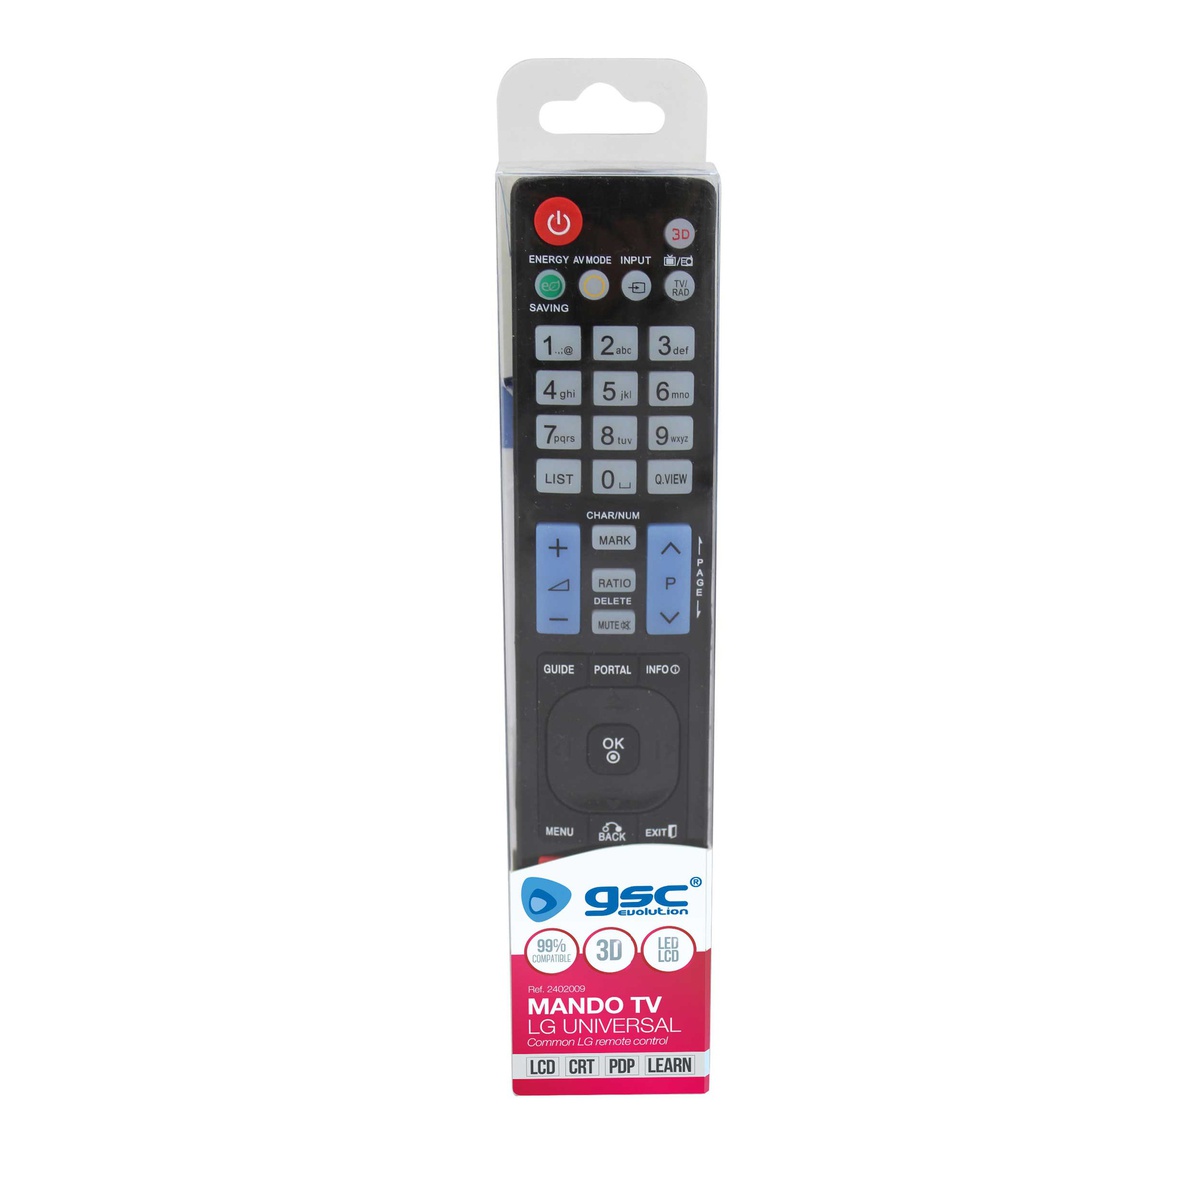 Universal remote for LG TV